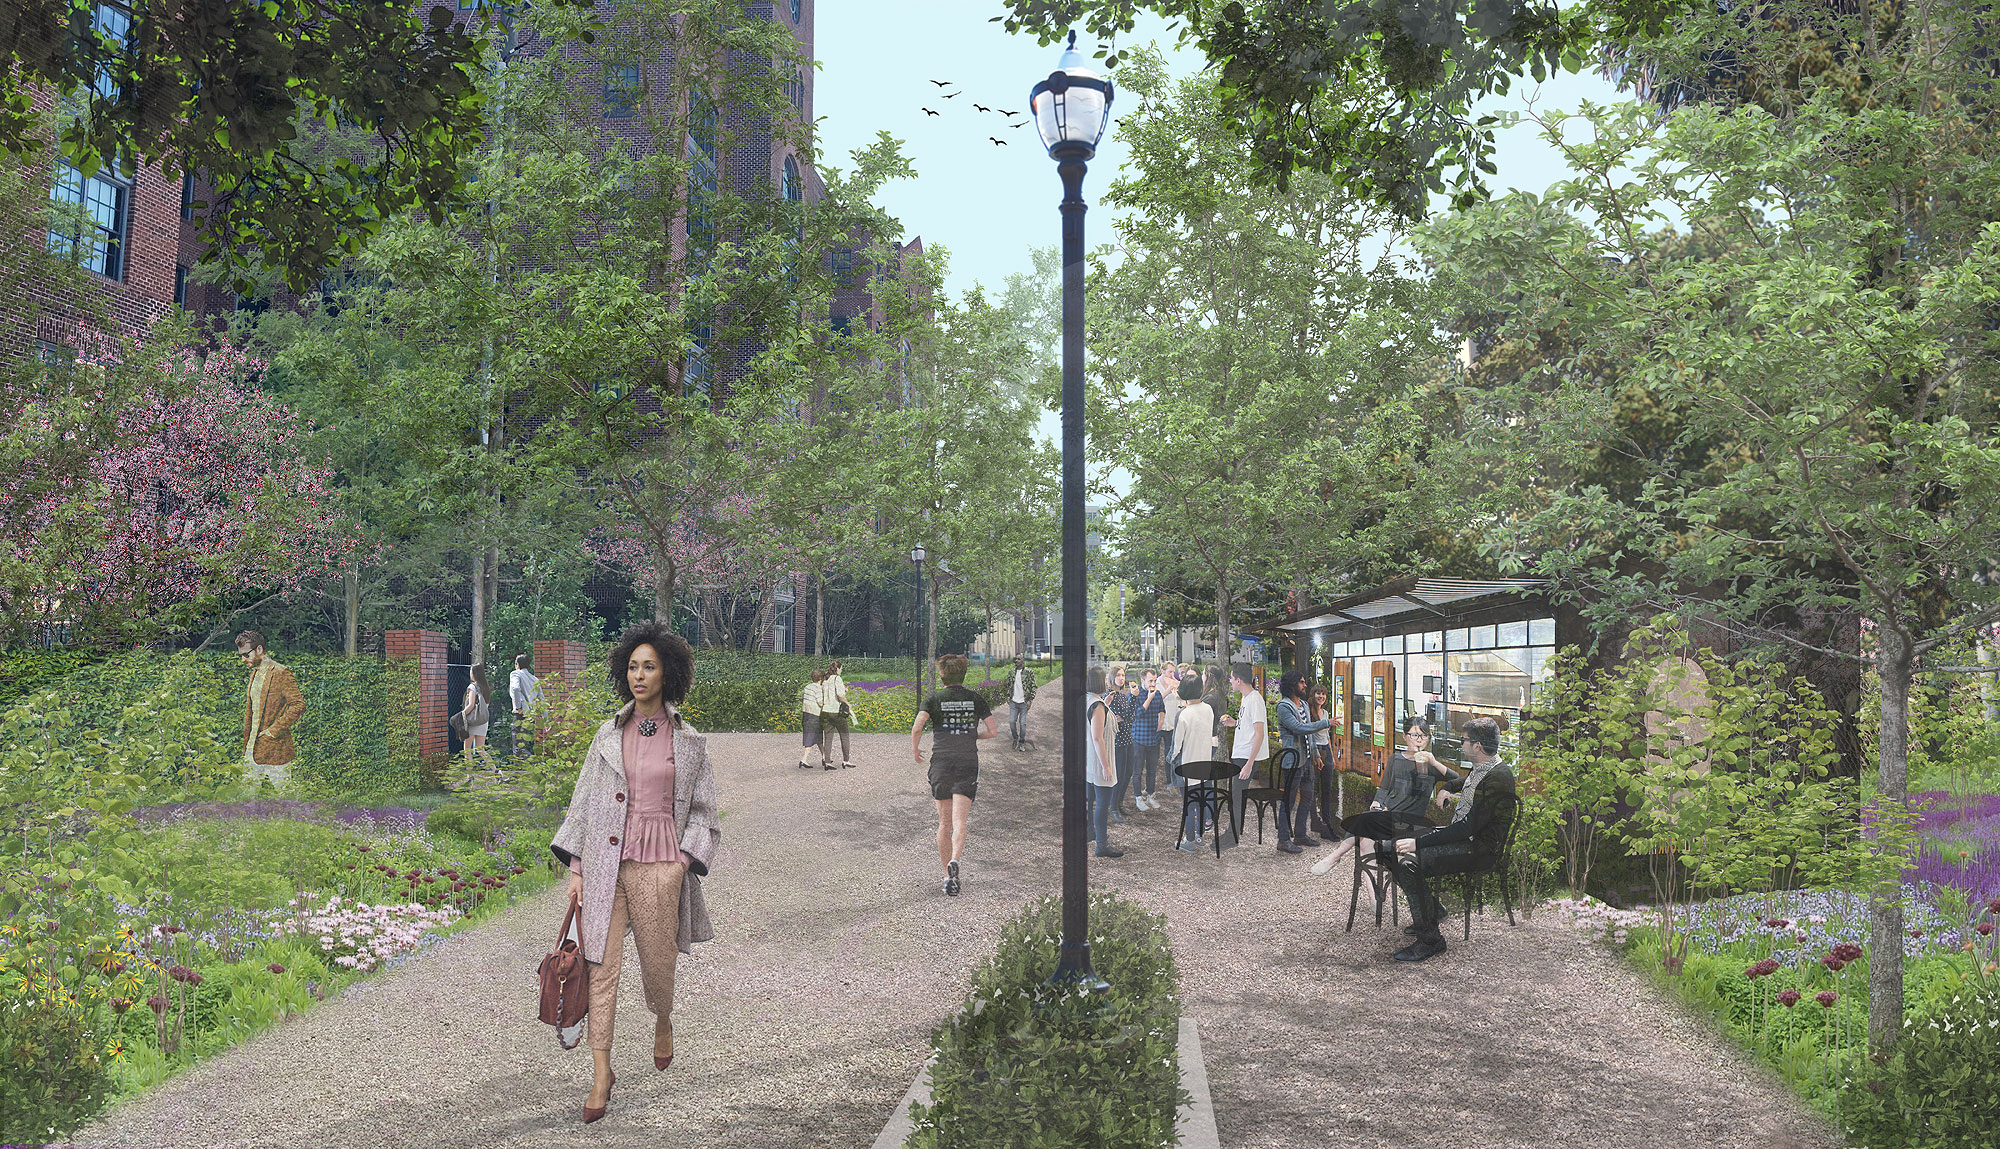 Charleston’s Lowline project takes a major step forward